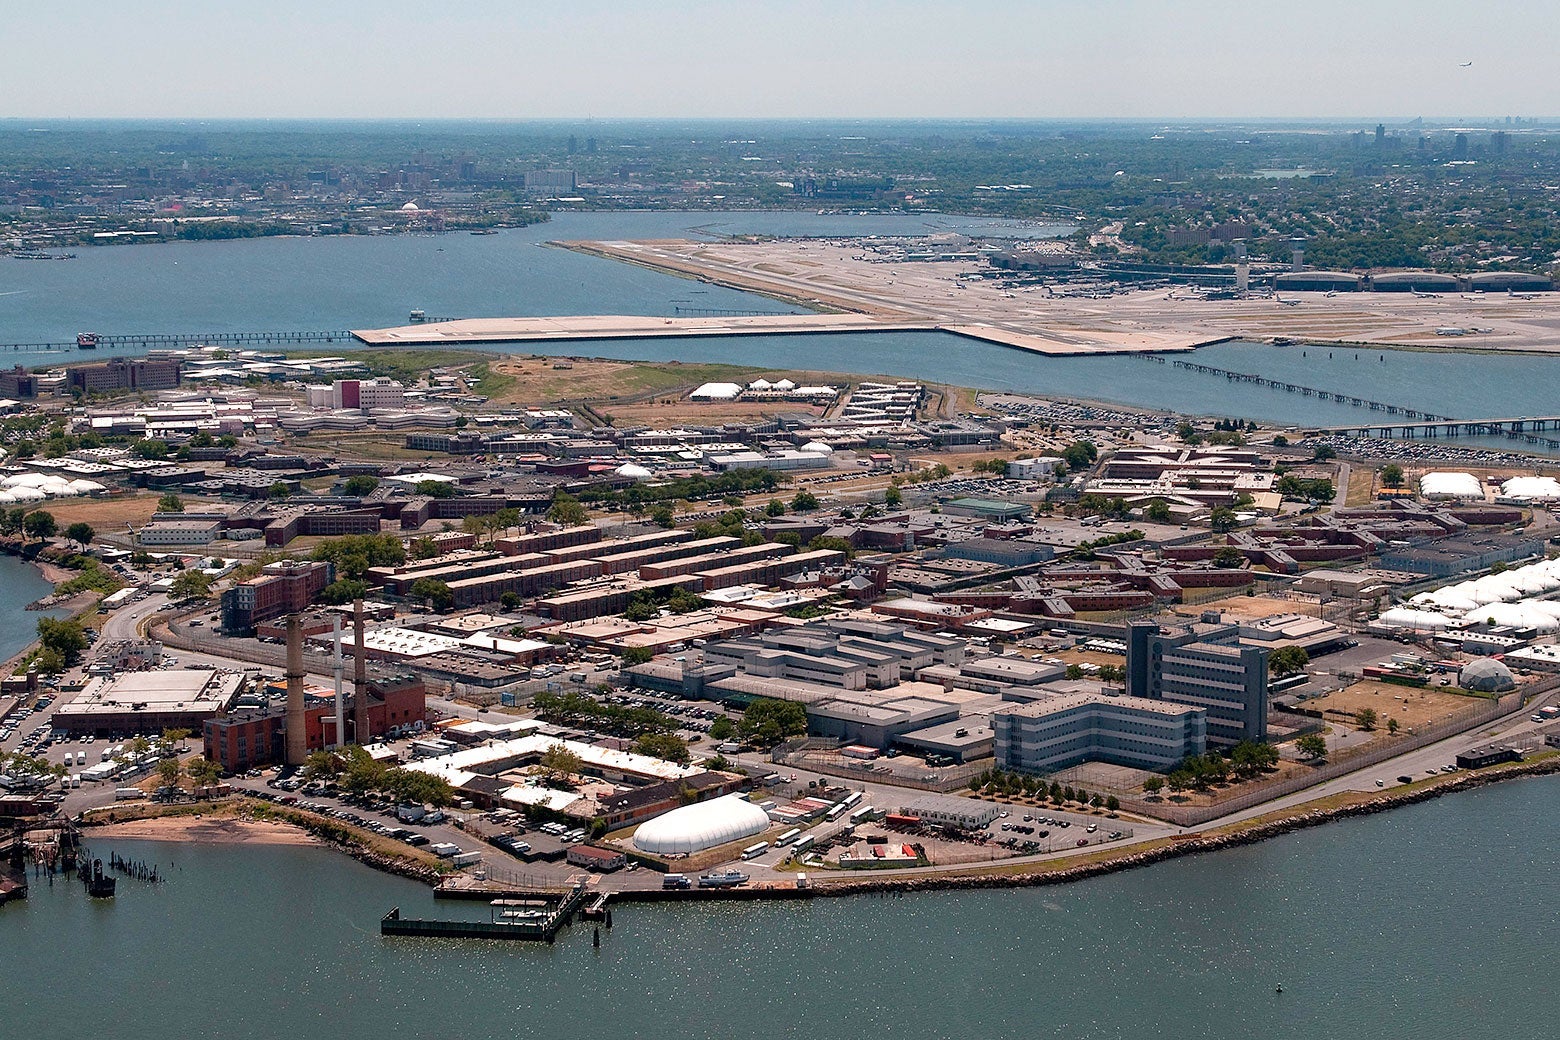 An aerial view of the Rikers Island prison